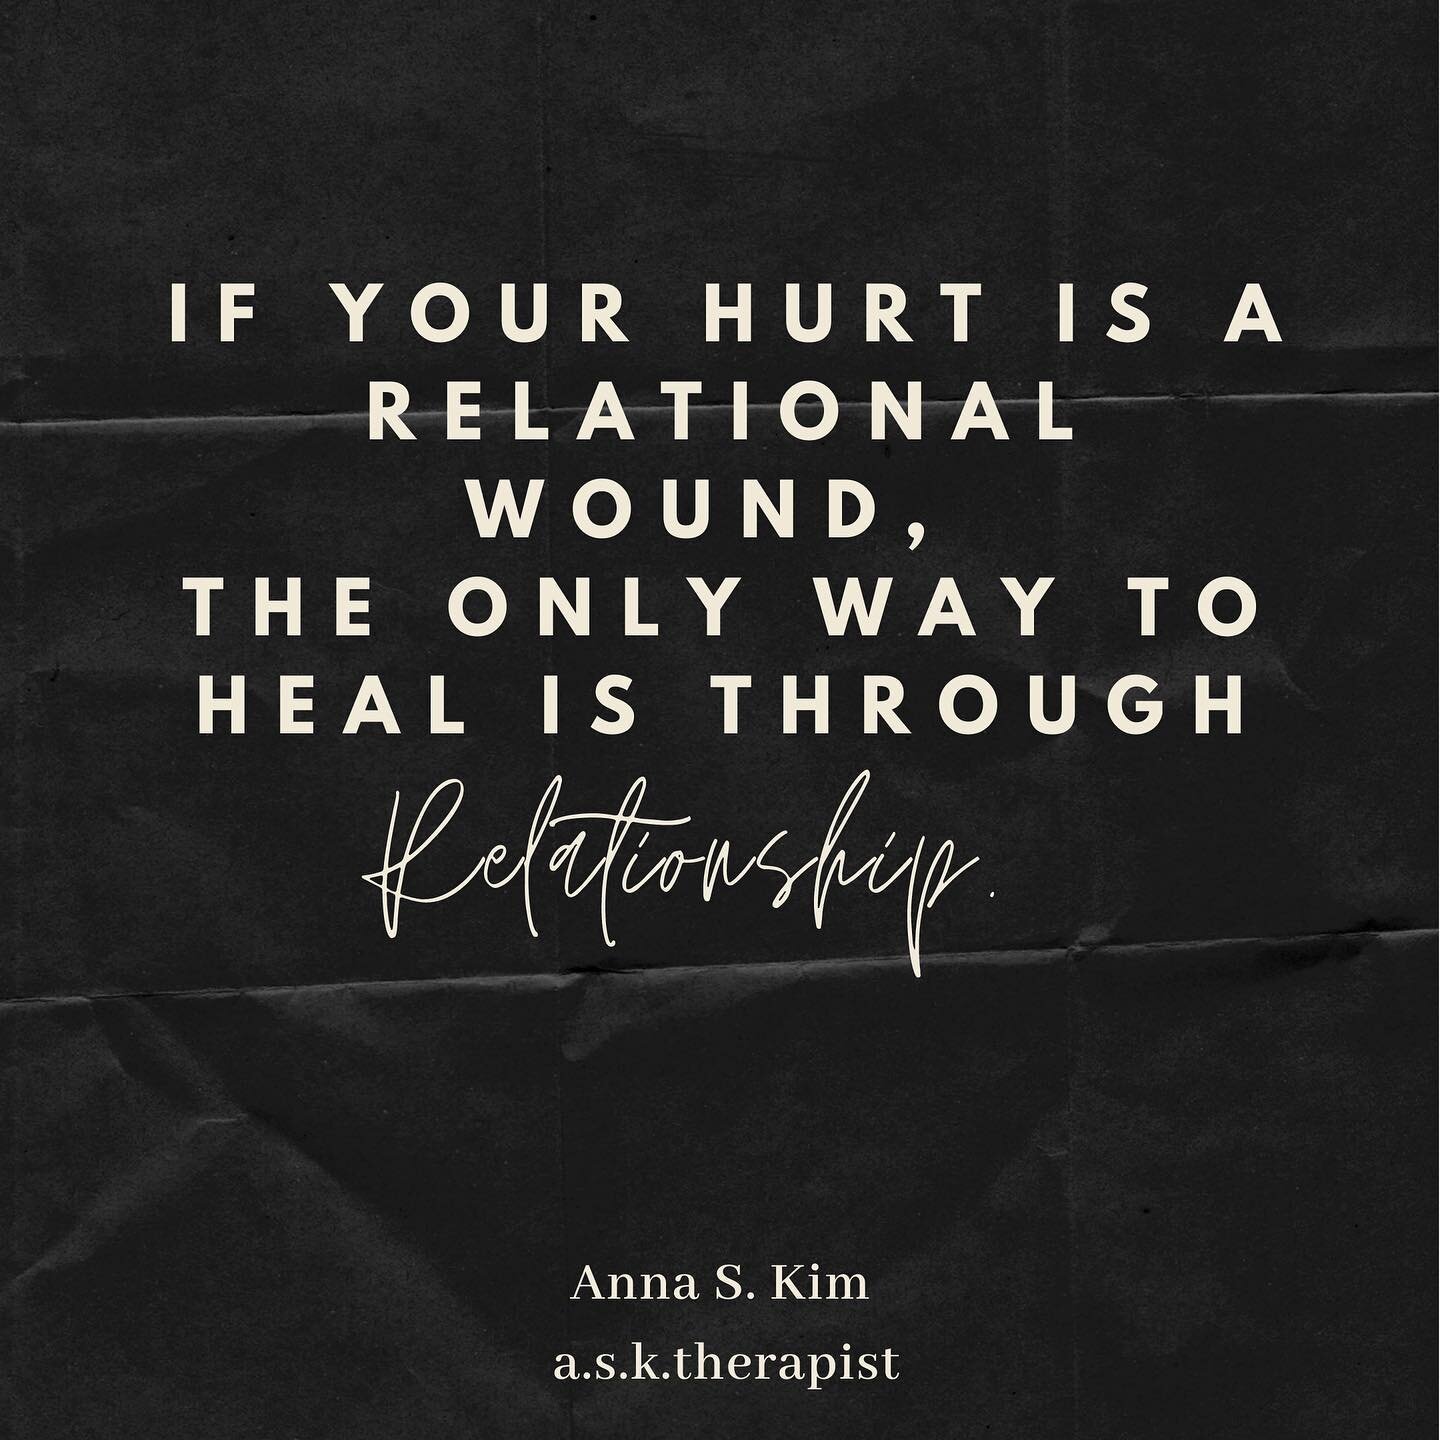 In other words, problems and suffering that are formed in the context of relationships (such as trauma, loss, abuse, neglect), can only be healed in the context of caring and nurturing relationships. 

This is a message of hope. Now that we know how 